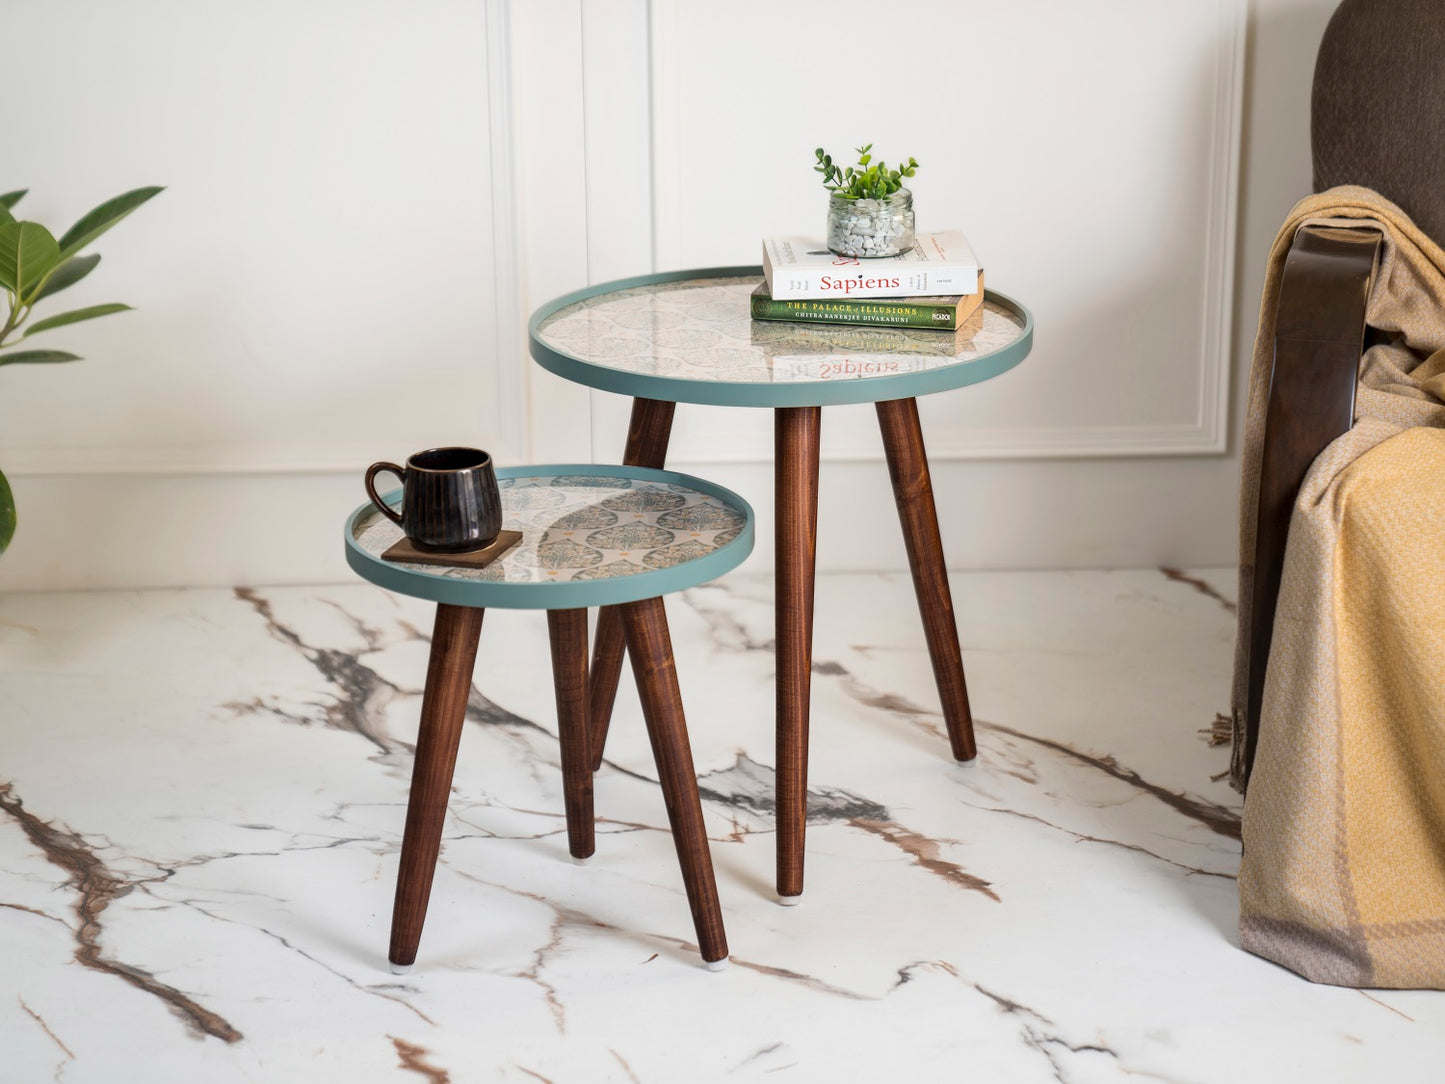 Vriksha Round Nesting Tables with Wooden Legs, Side Tables, Wooden Tables, Living Room Decor by A Tiny Mistake